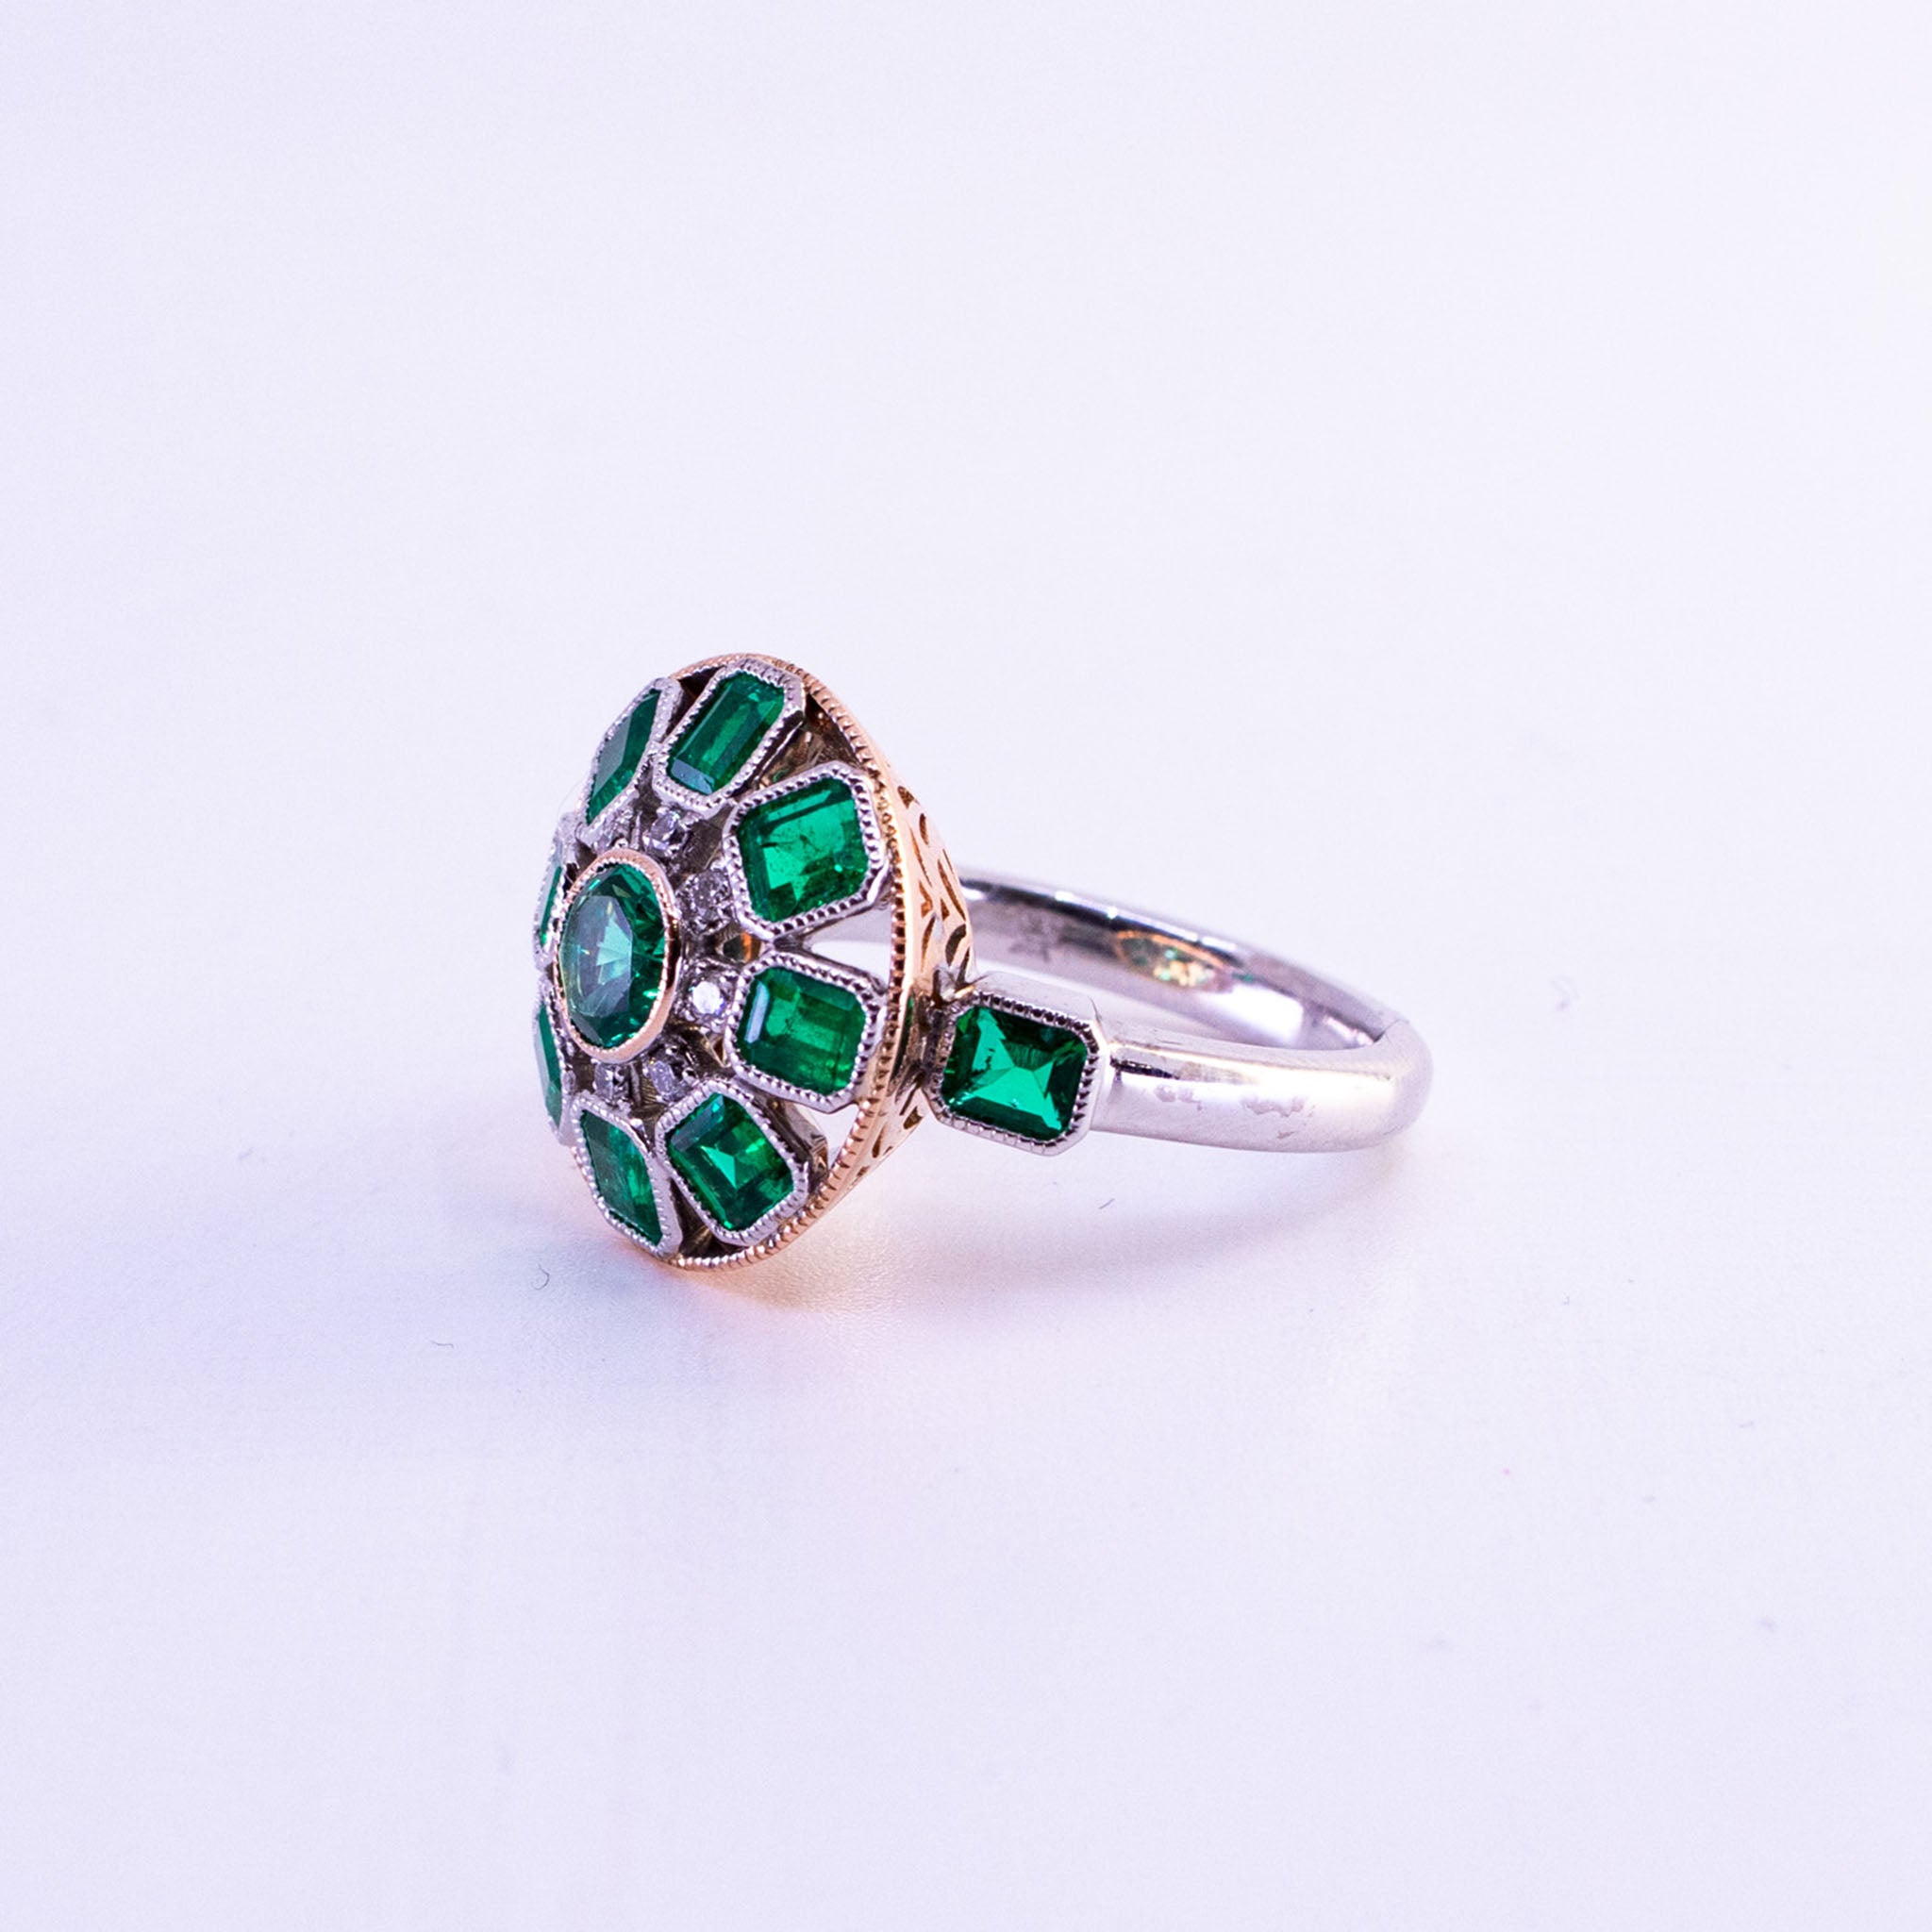 Columbian Emerald Ring with Art Deco Detail